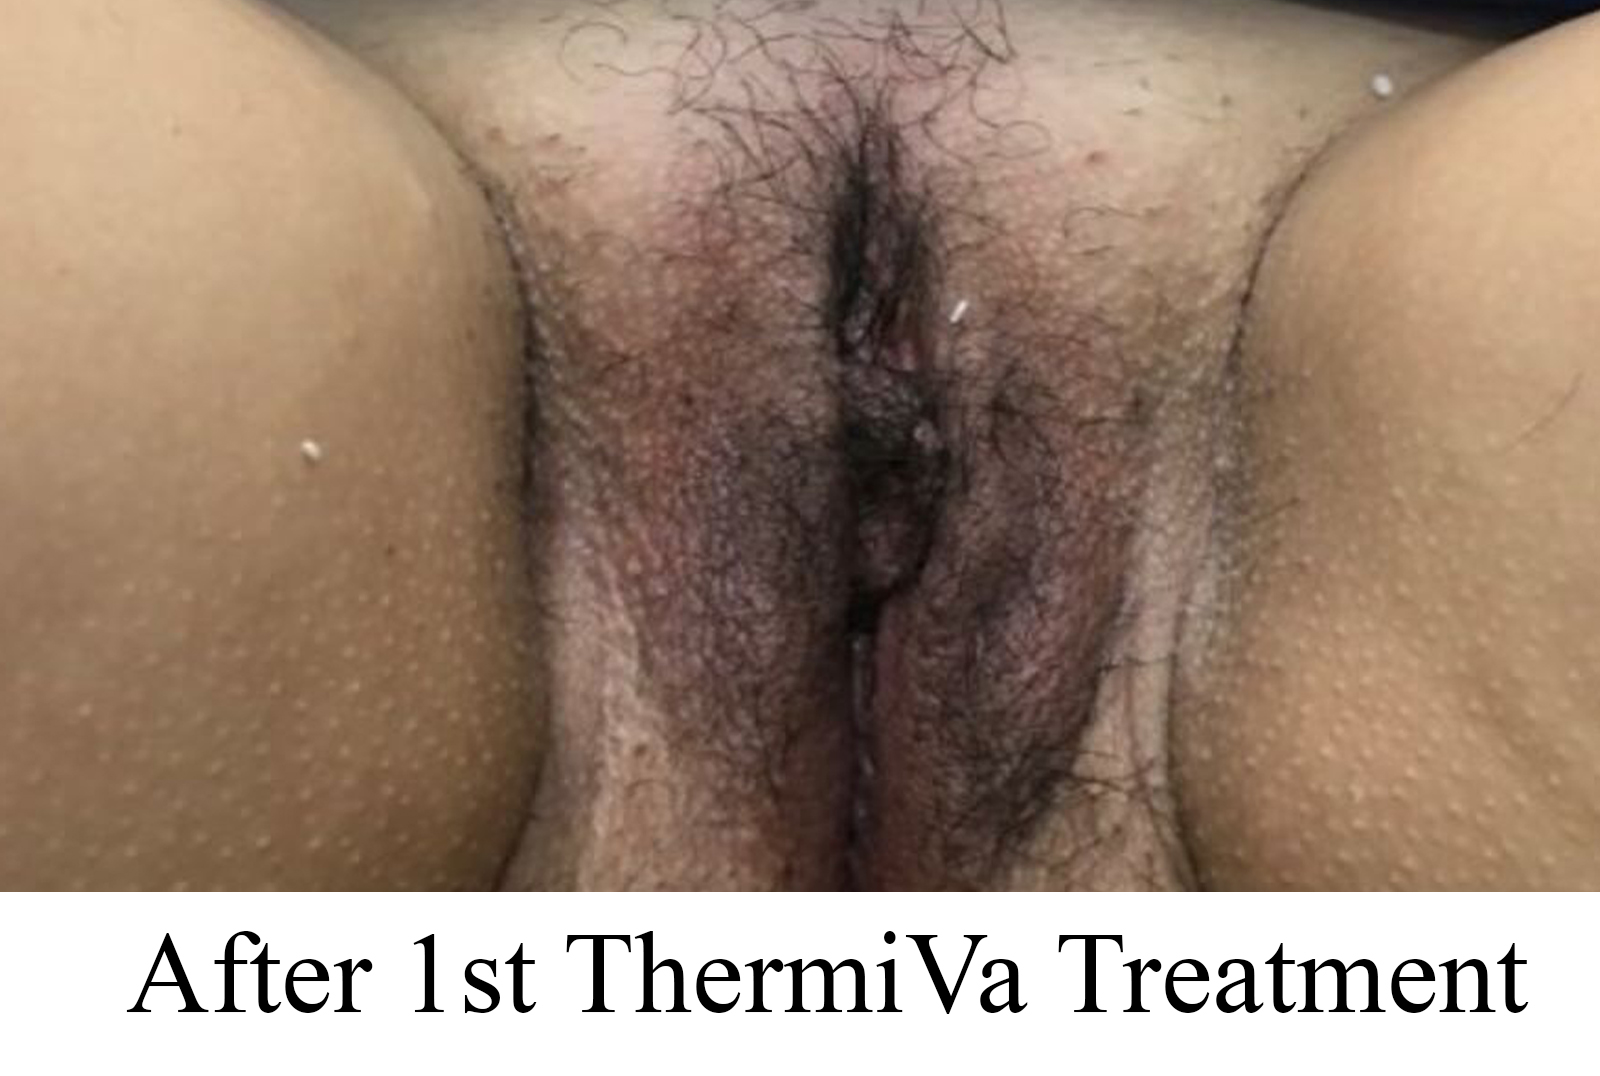 After 1st ThermiVa Treatment